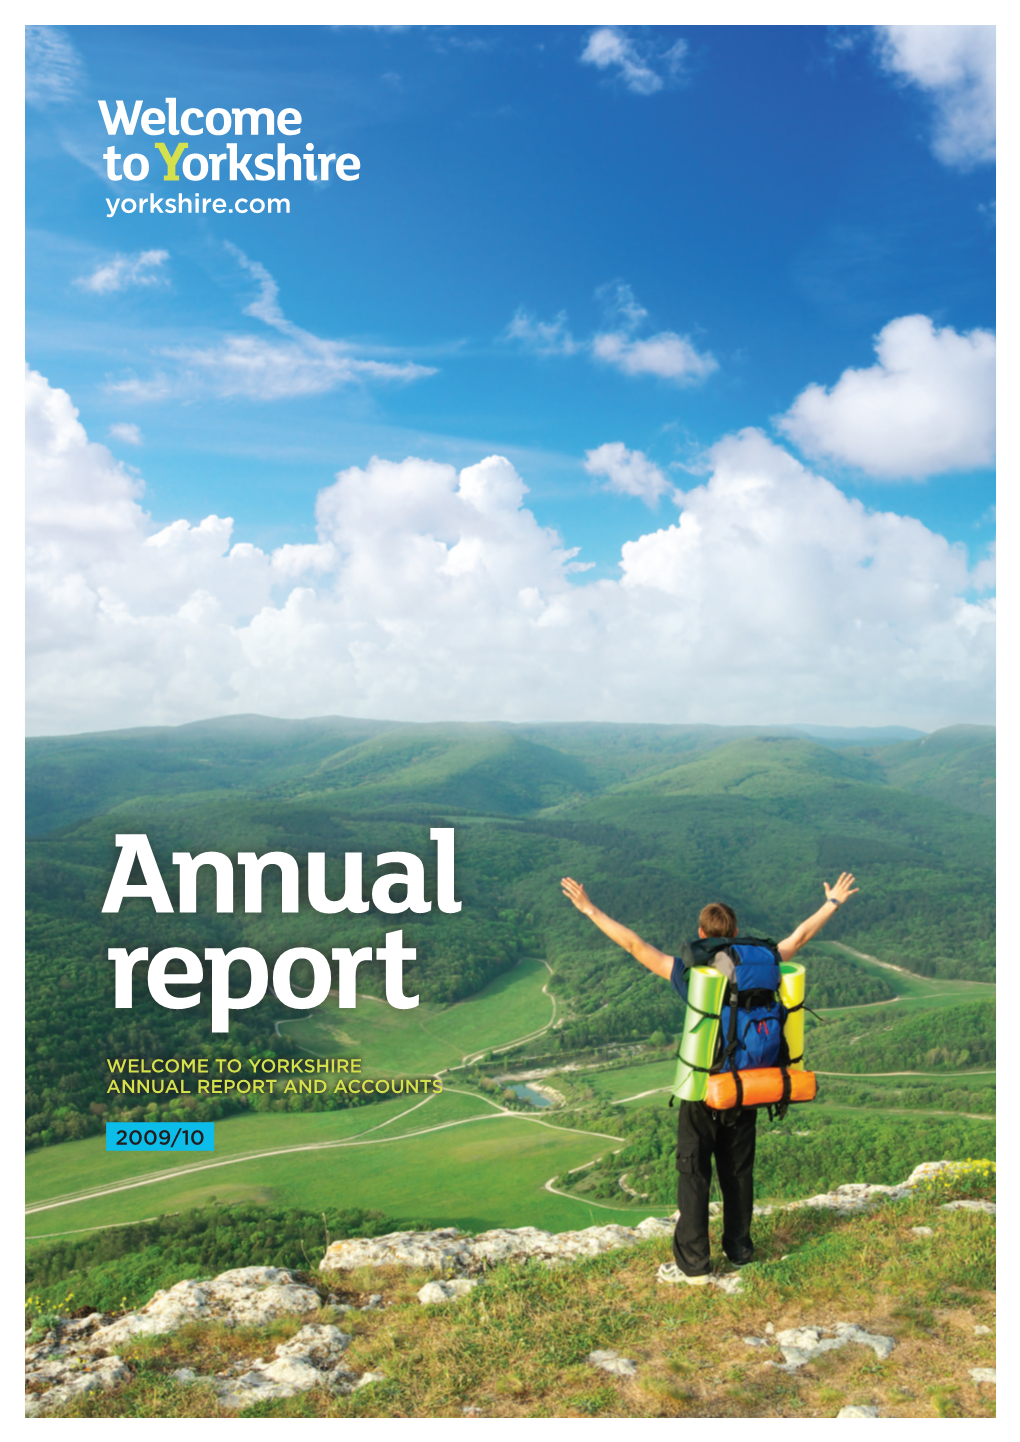 Annual Report and Accounts 2010